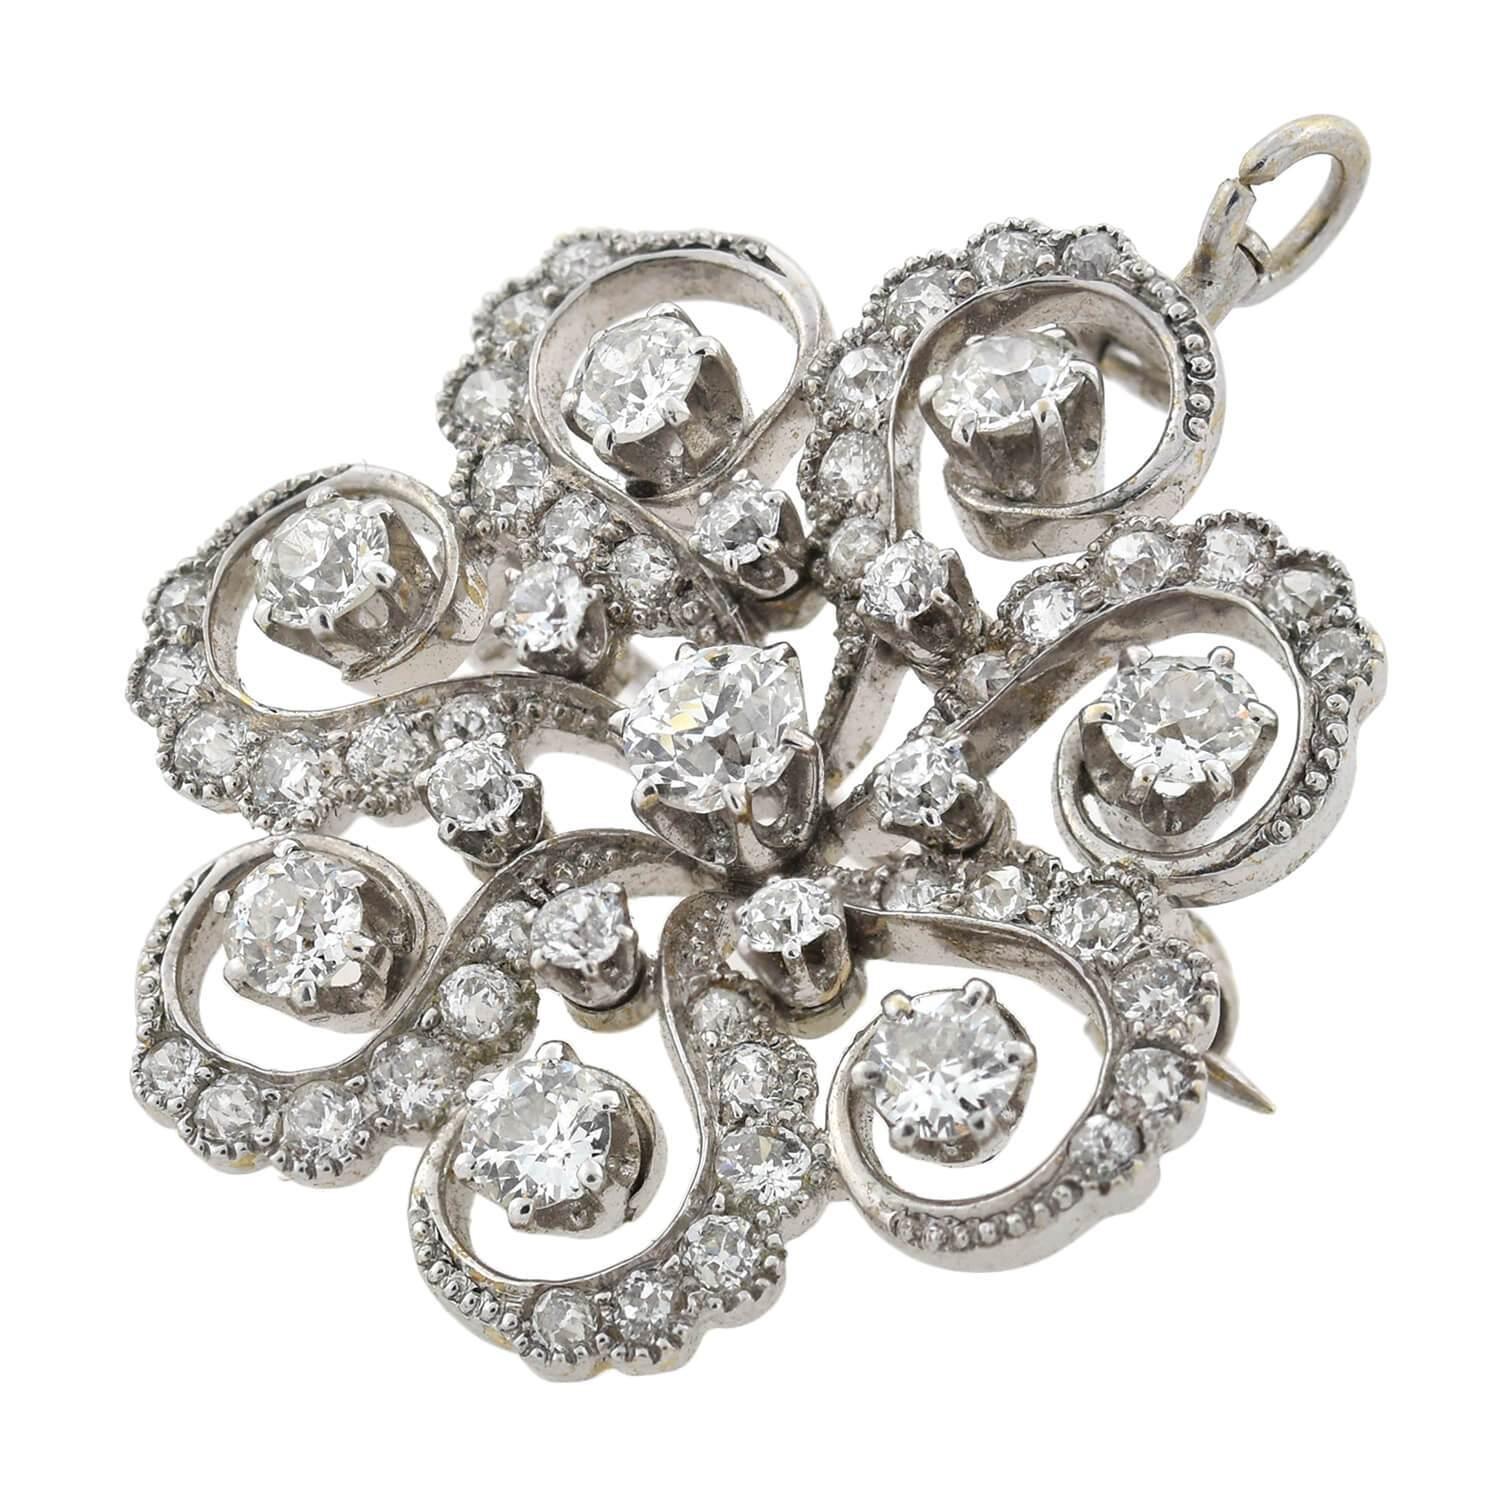 A beautiful diamond encrusted pin/pendant from the late Art Deco (ca1930s) era! This stunning piece is crafted in rhodium plated 18kt gold and forms the unique shape of a swirled floral motif decorated with sparkling diamonds. Seven beautiful old